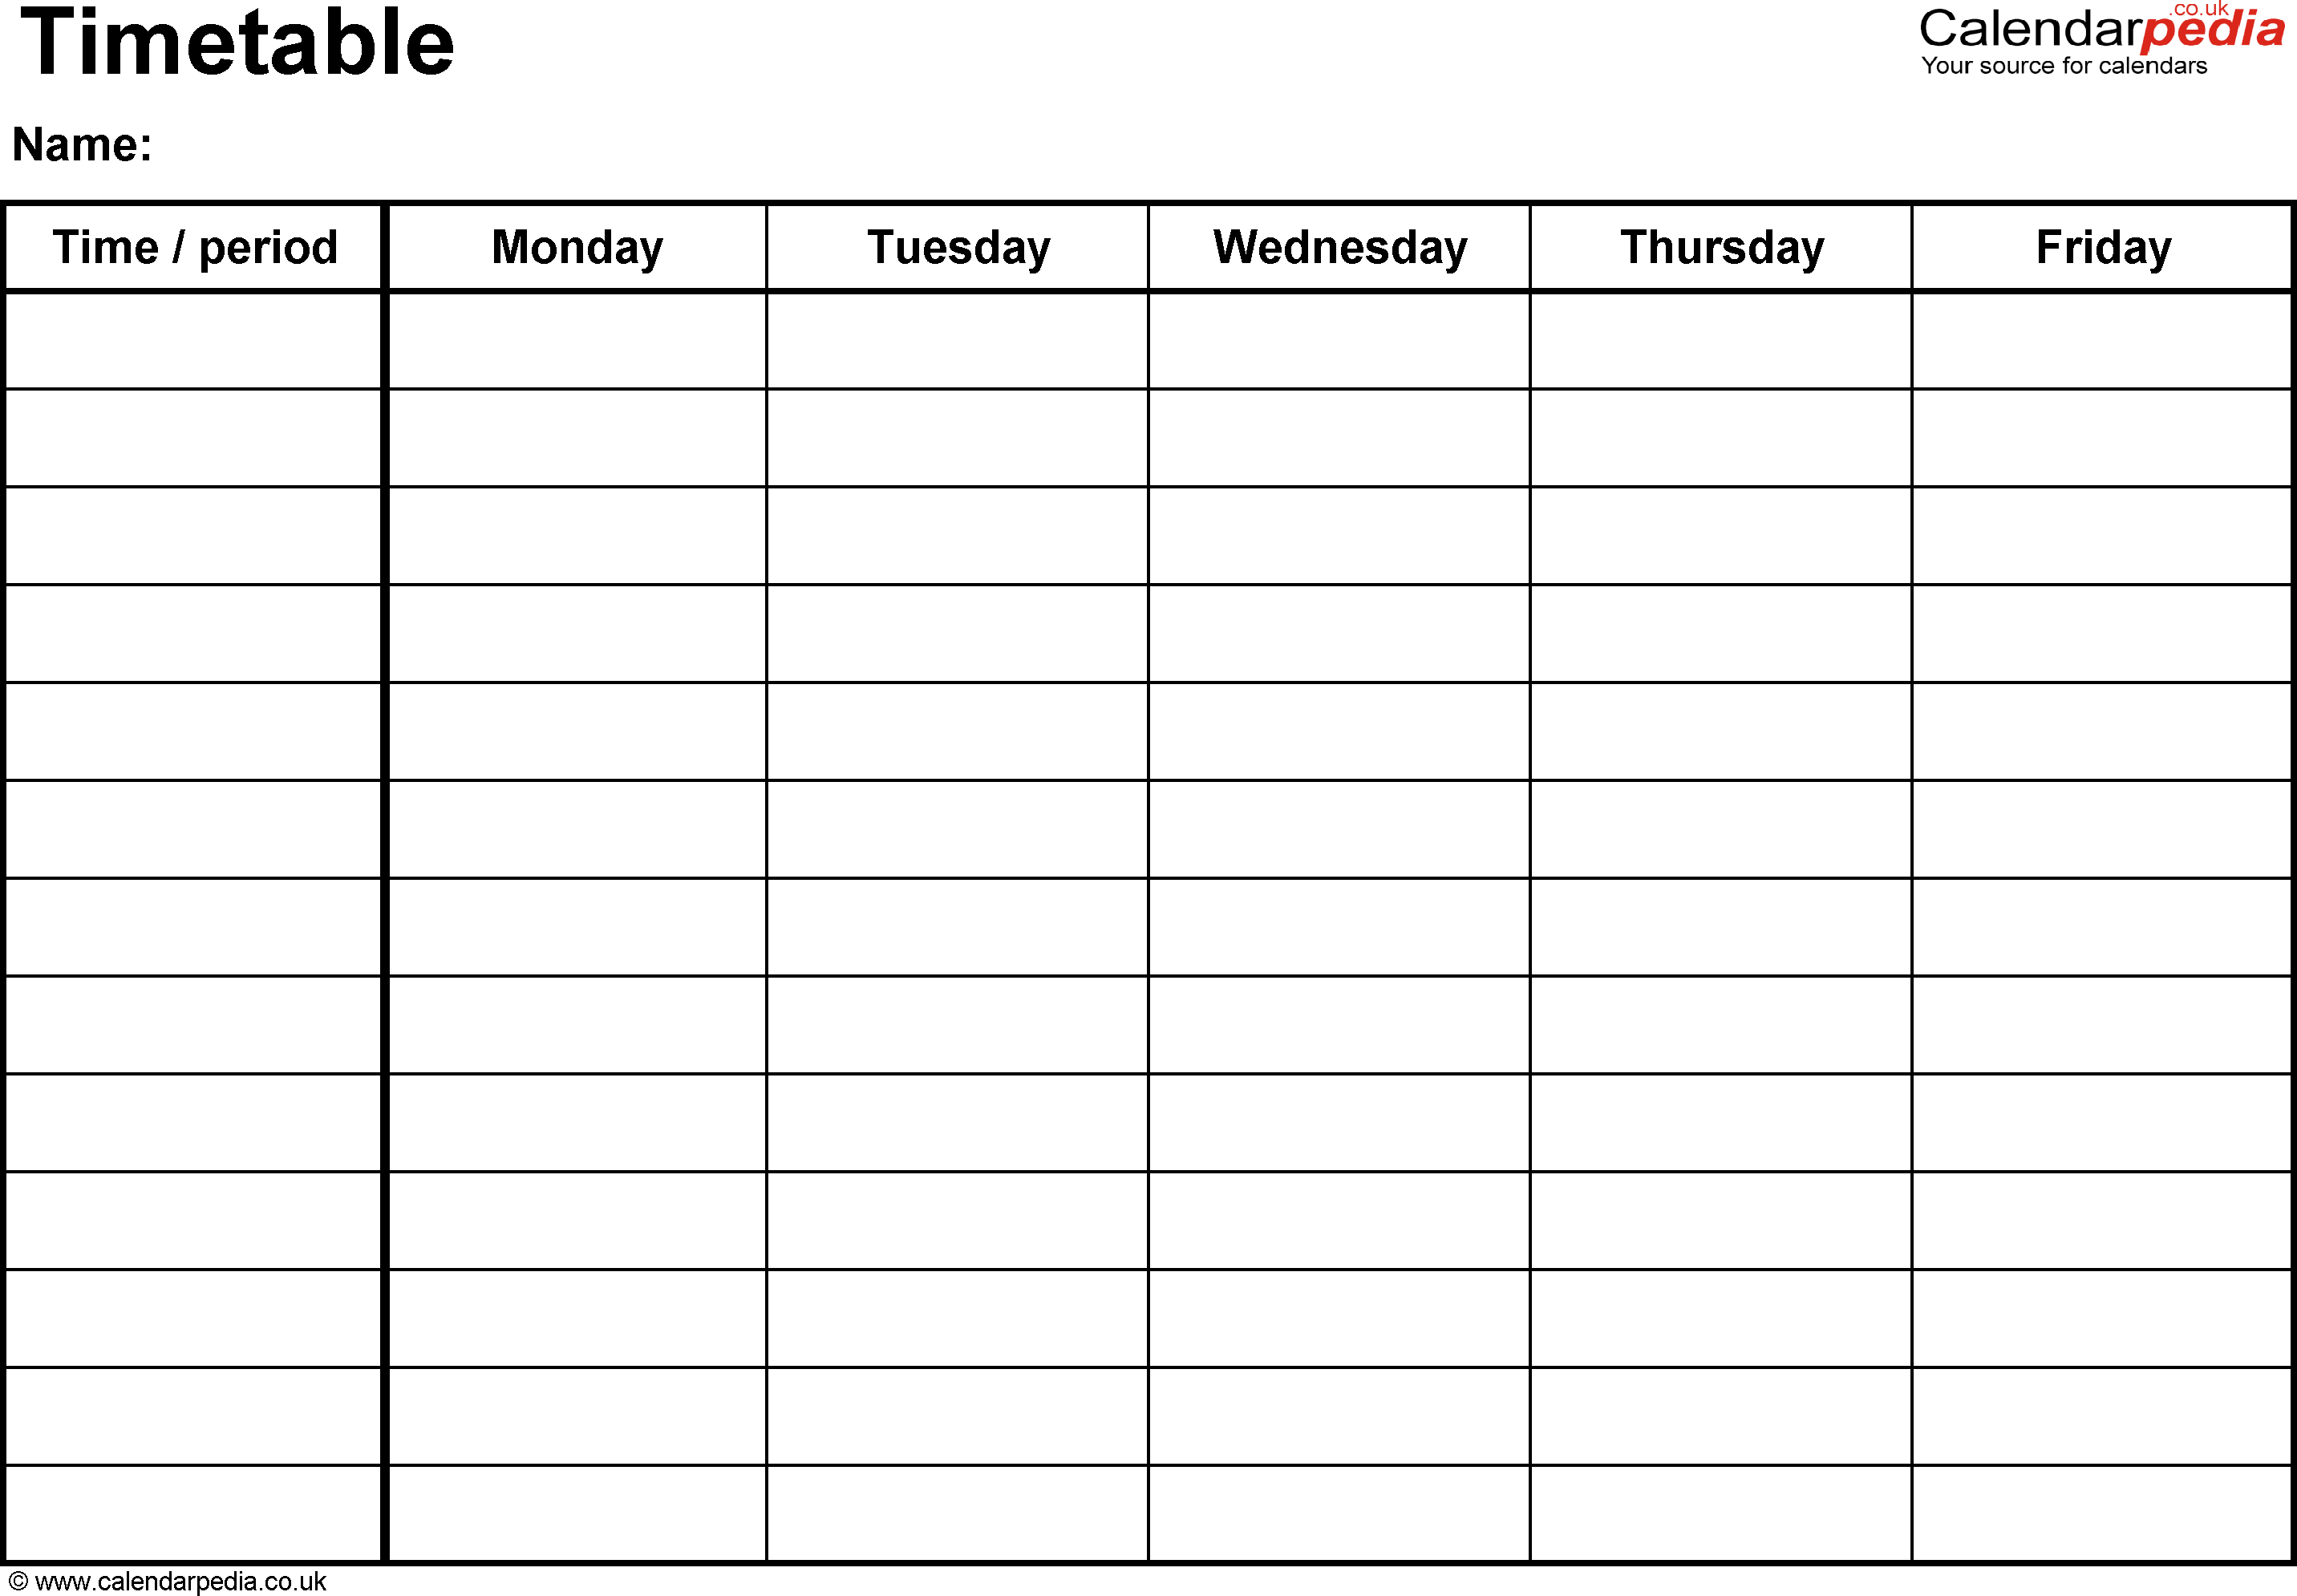 Timetables as free printable templates for Microsoft Word